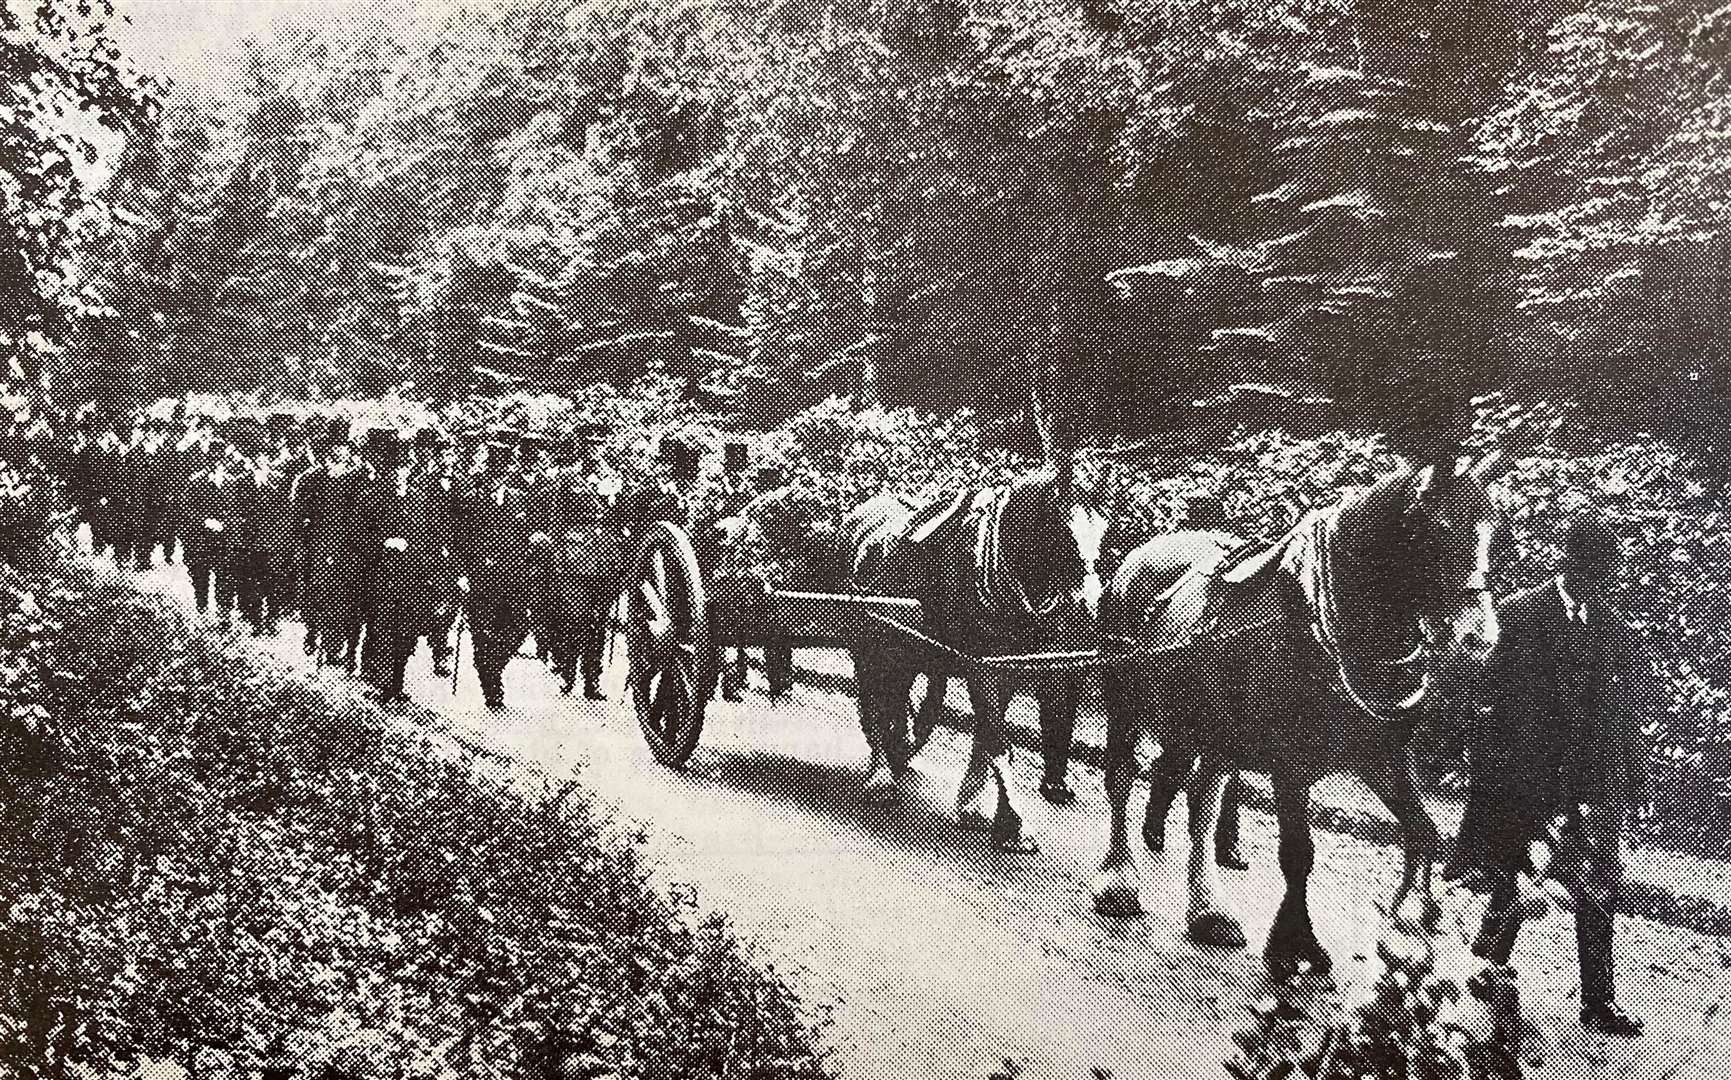 Lord Horne's funeral procession.